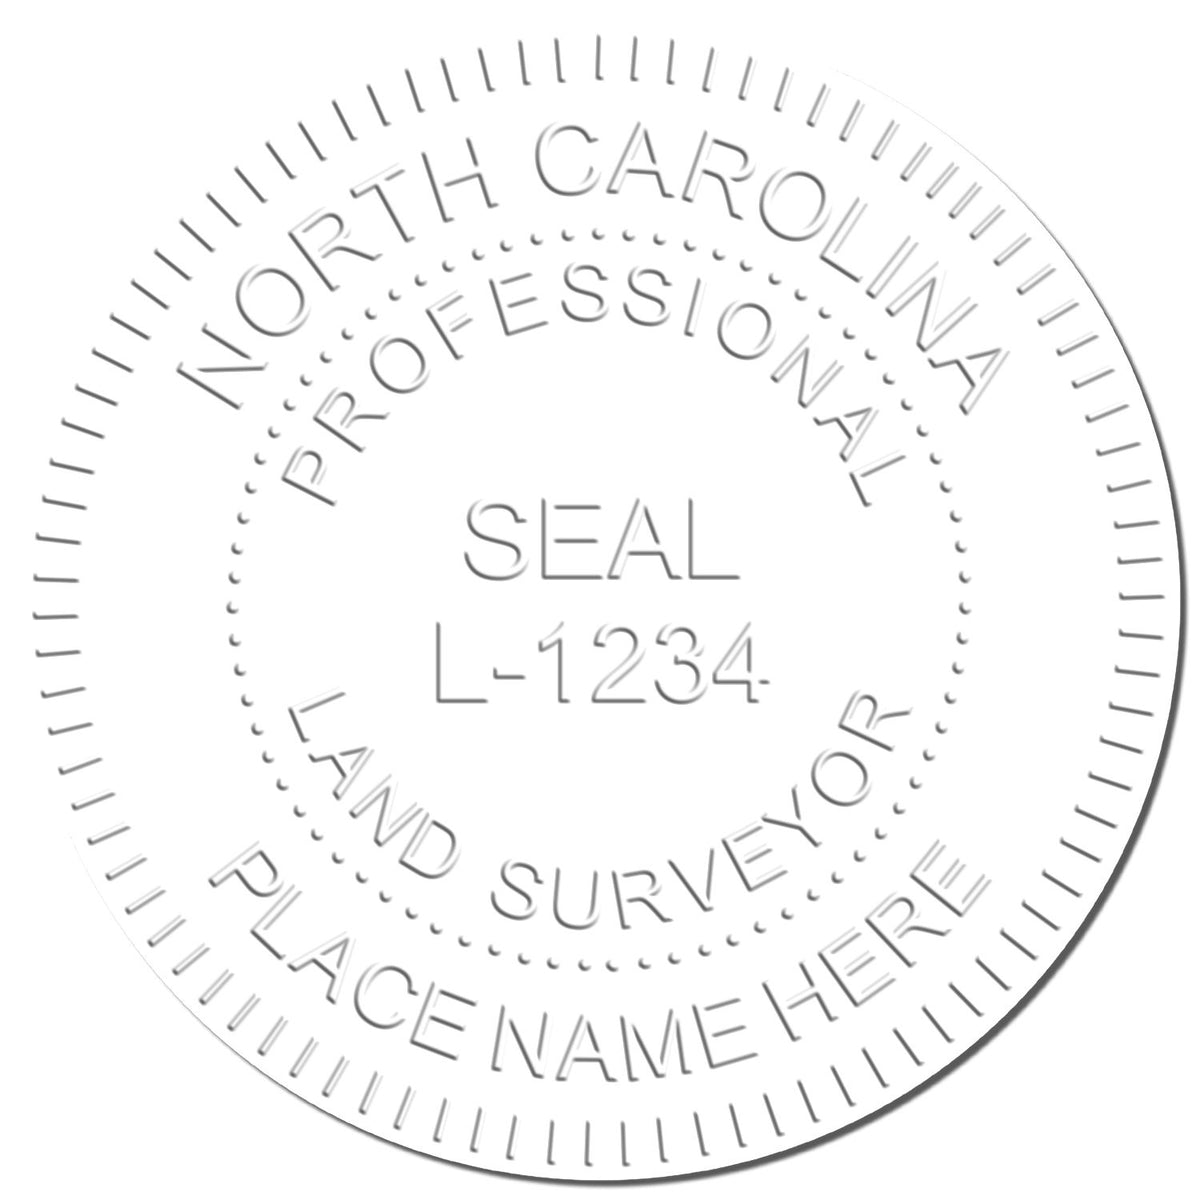 This paper is stamped with a sample imprint of the Hybrid North Carolina Land Surveyor Seal, signifying its quality and reliability.